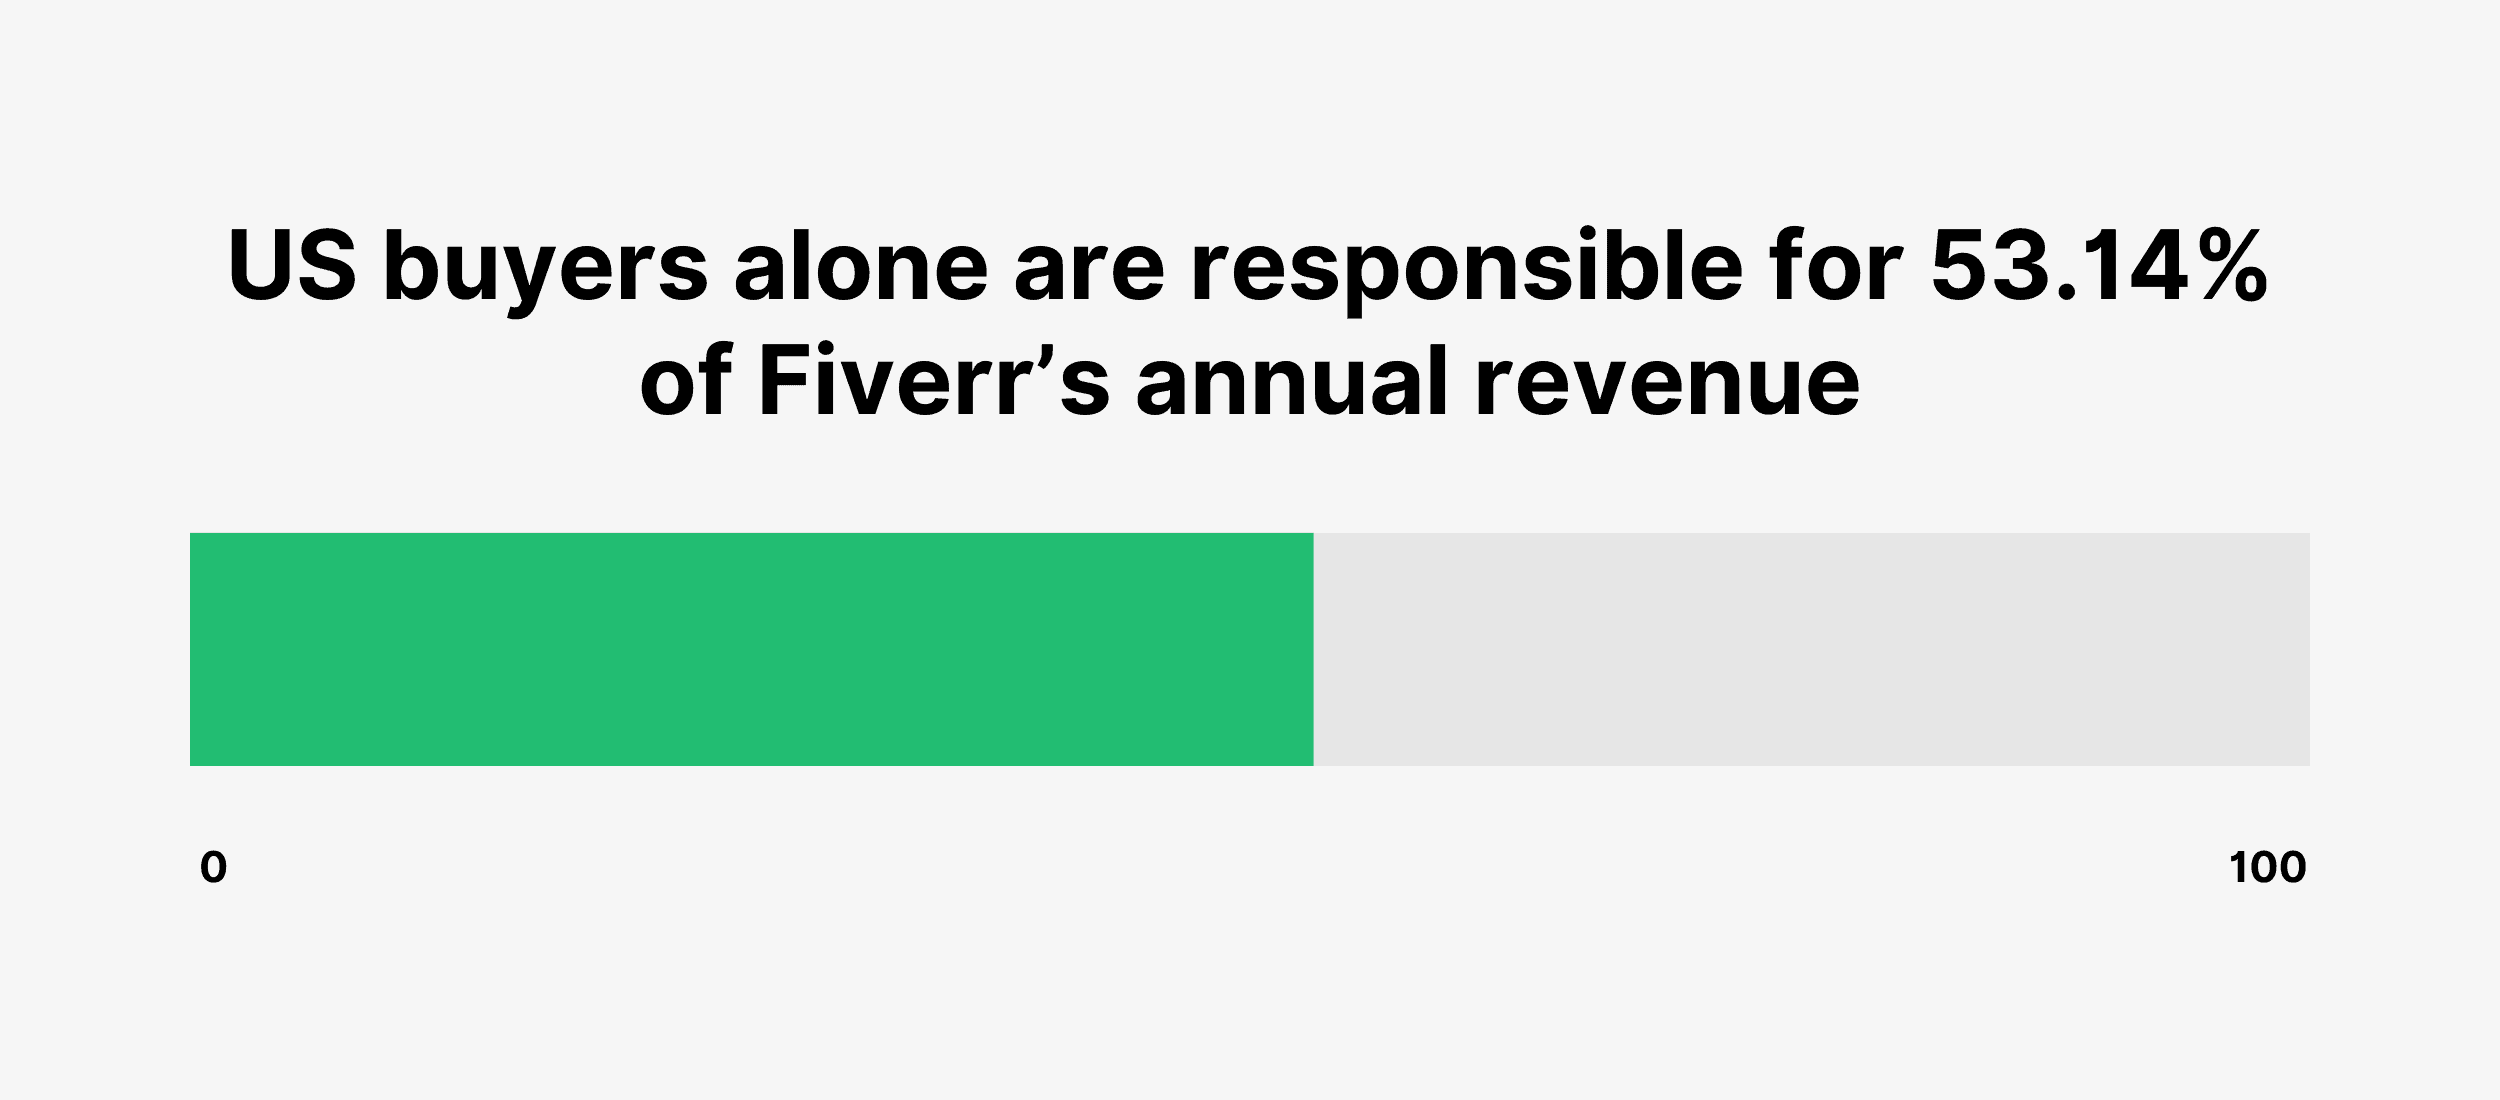 US buyers alone are responsible for 53.14% of Fiverr’s annual revenue